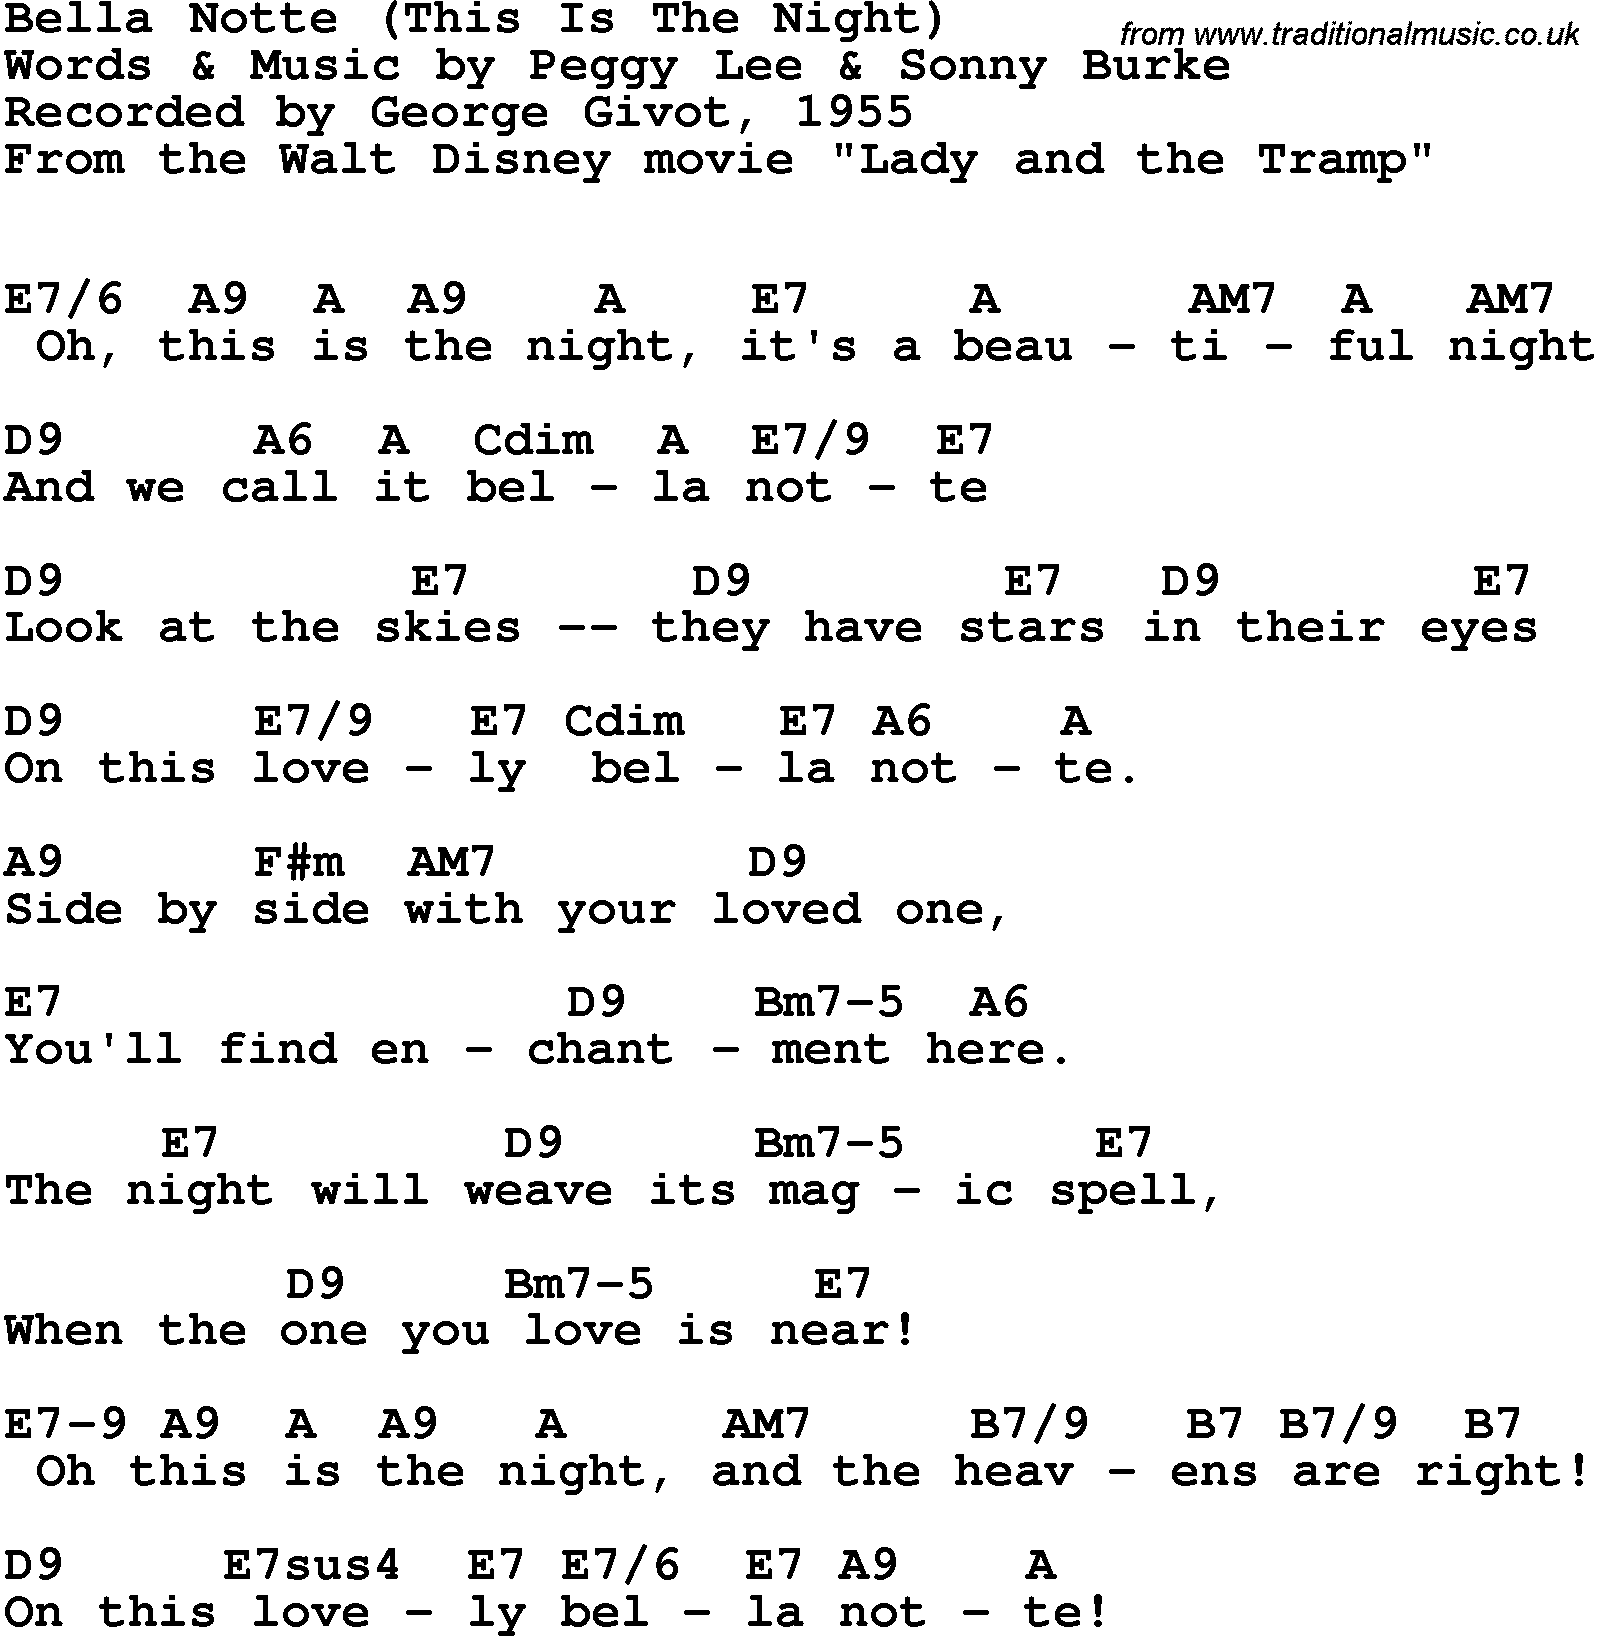 Song Lyrics with guitar chords for Bella Notte (This Is The Night) - George Givot (As Tony), 1955